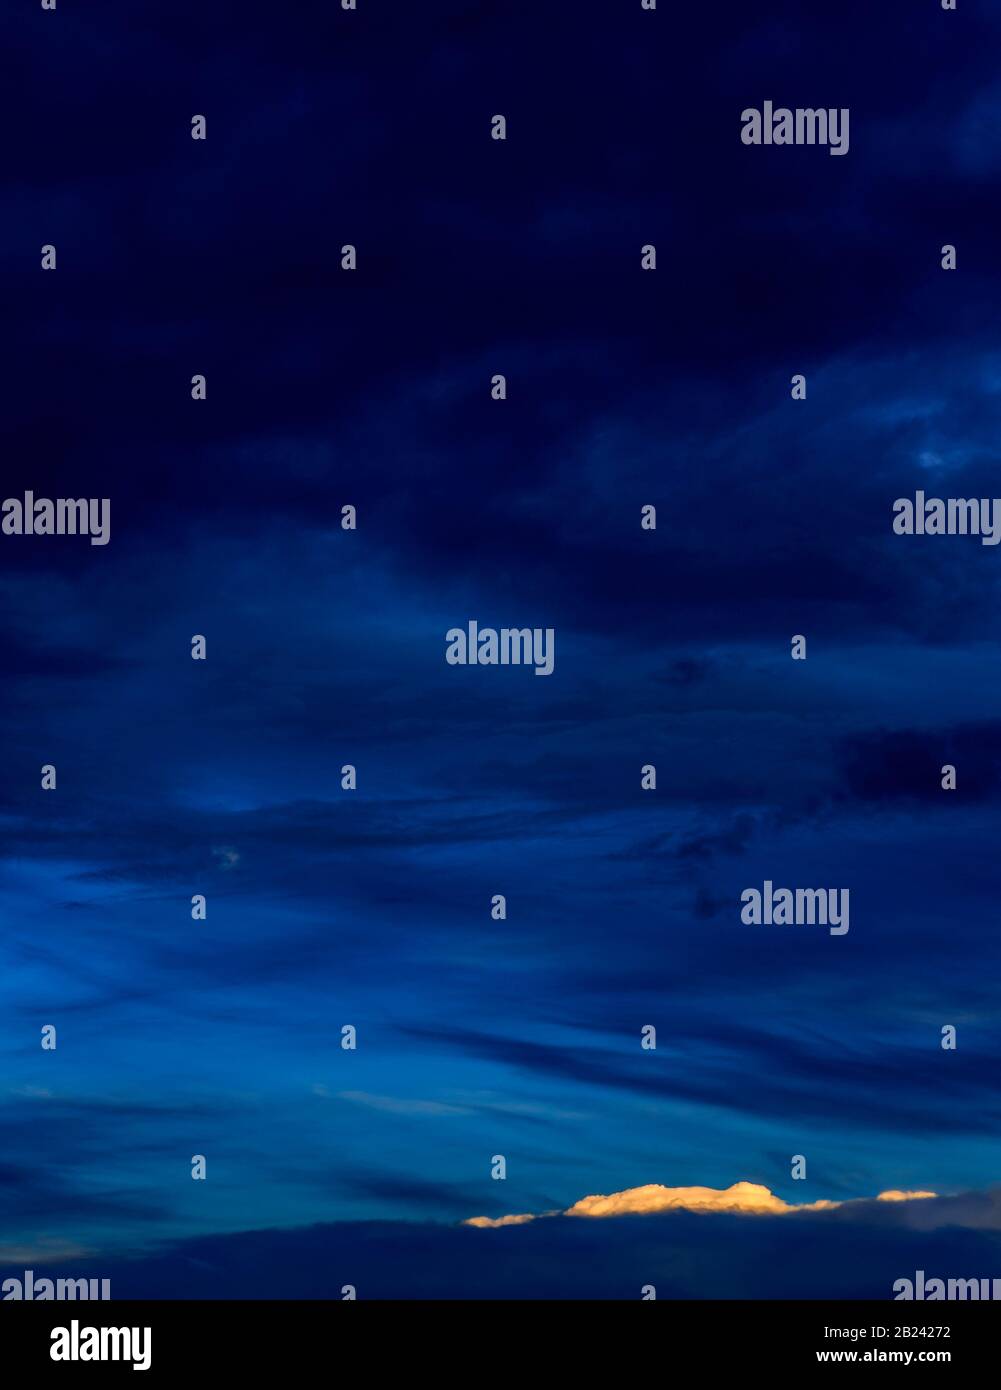 Vertical vivid blue nightscape of dramatic layered blues, pale moon and small bright cloud accent. Stock Photo